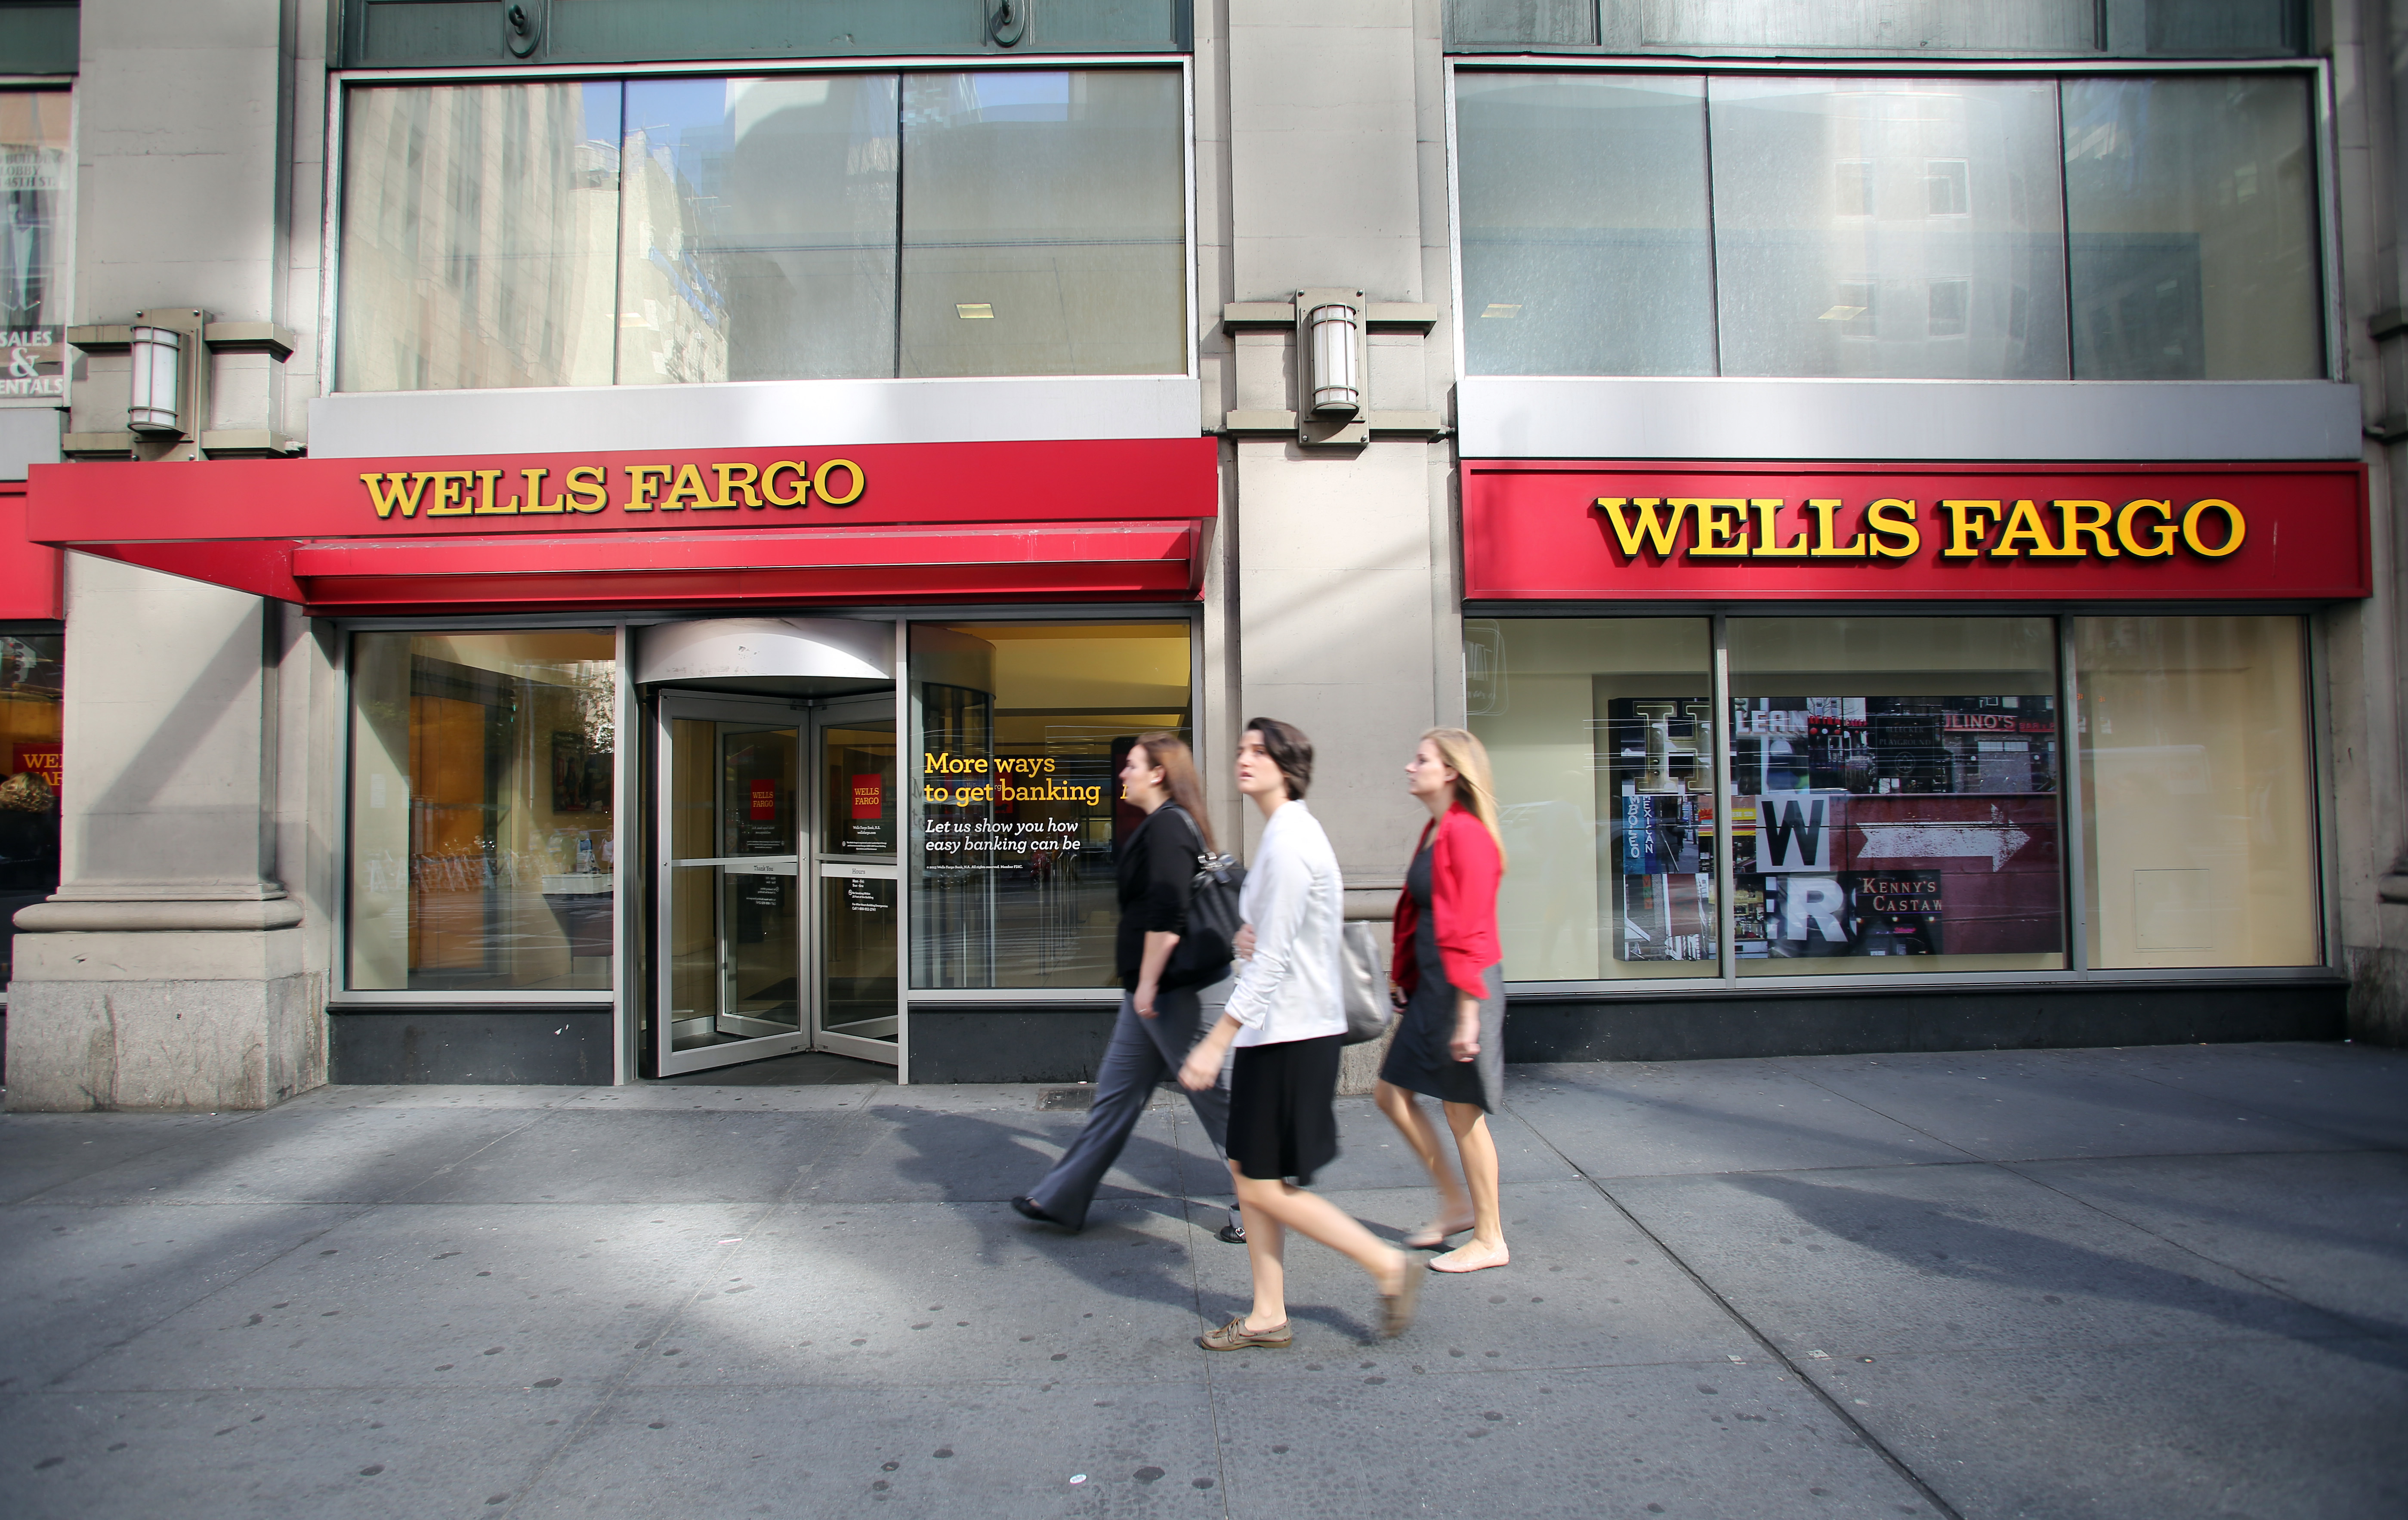 Wells Fargo Free Credit Score Promotion Not a Big Deal When There Are Free Alternatives.